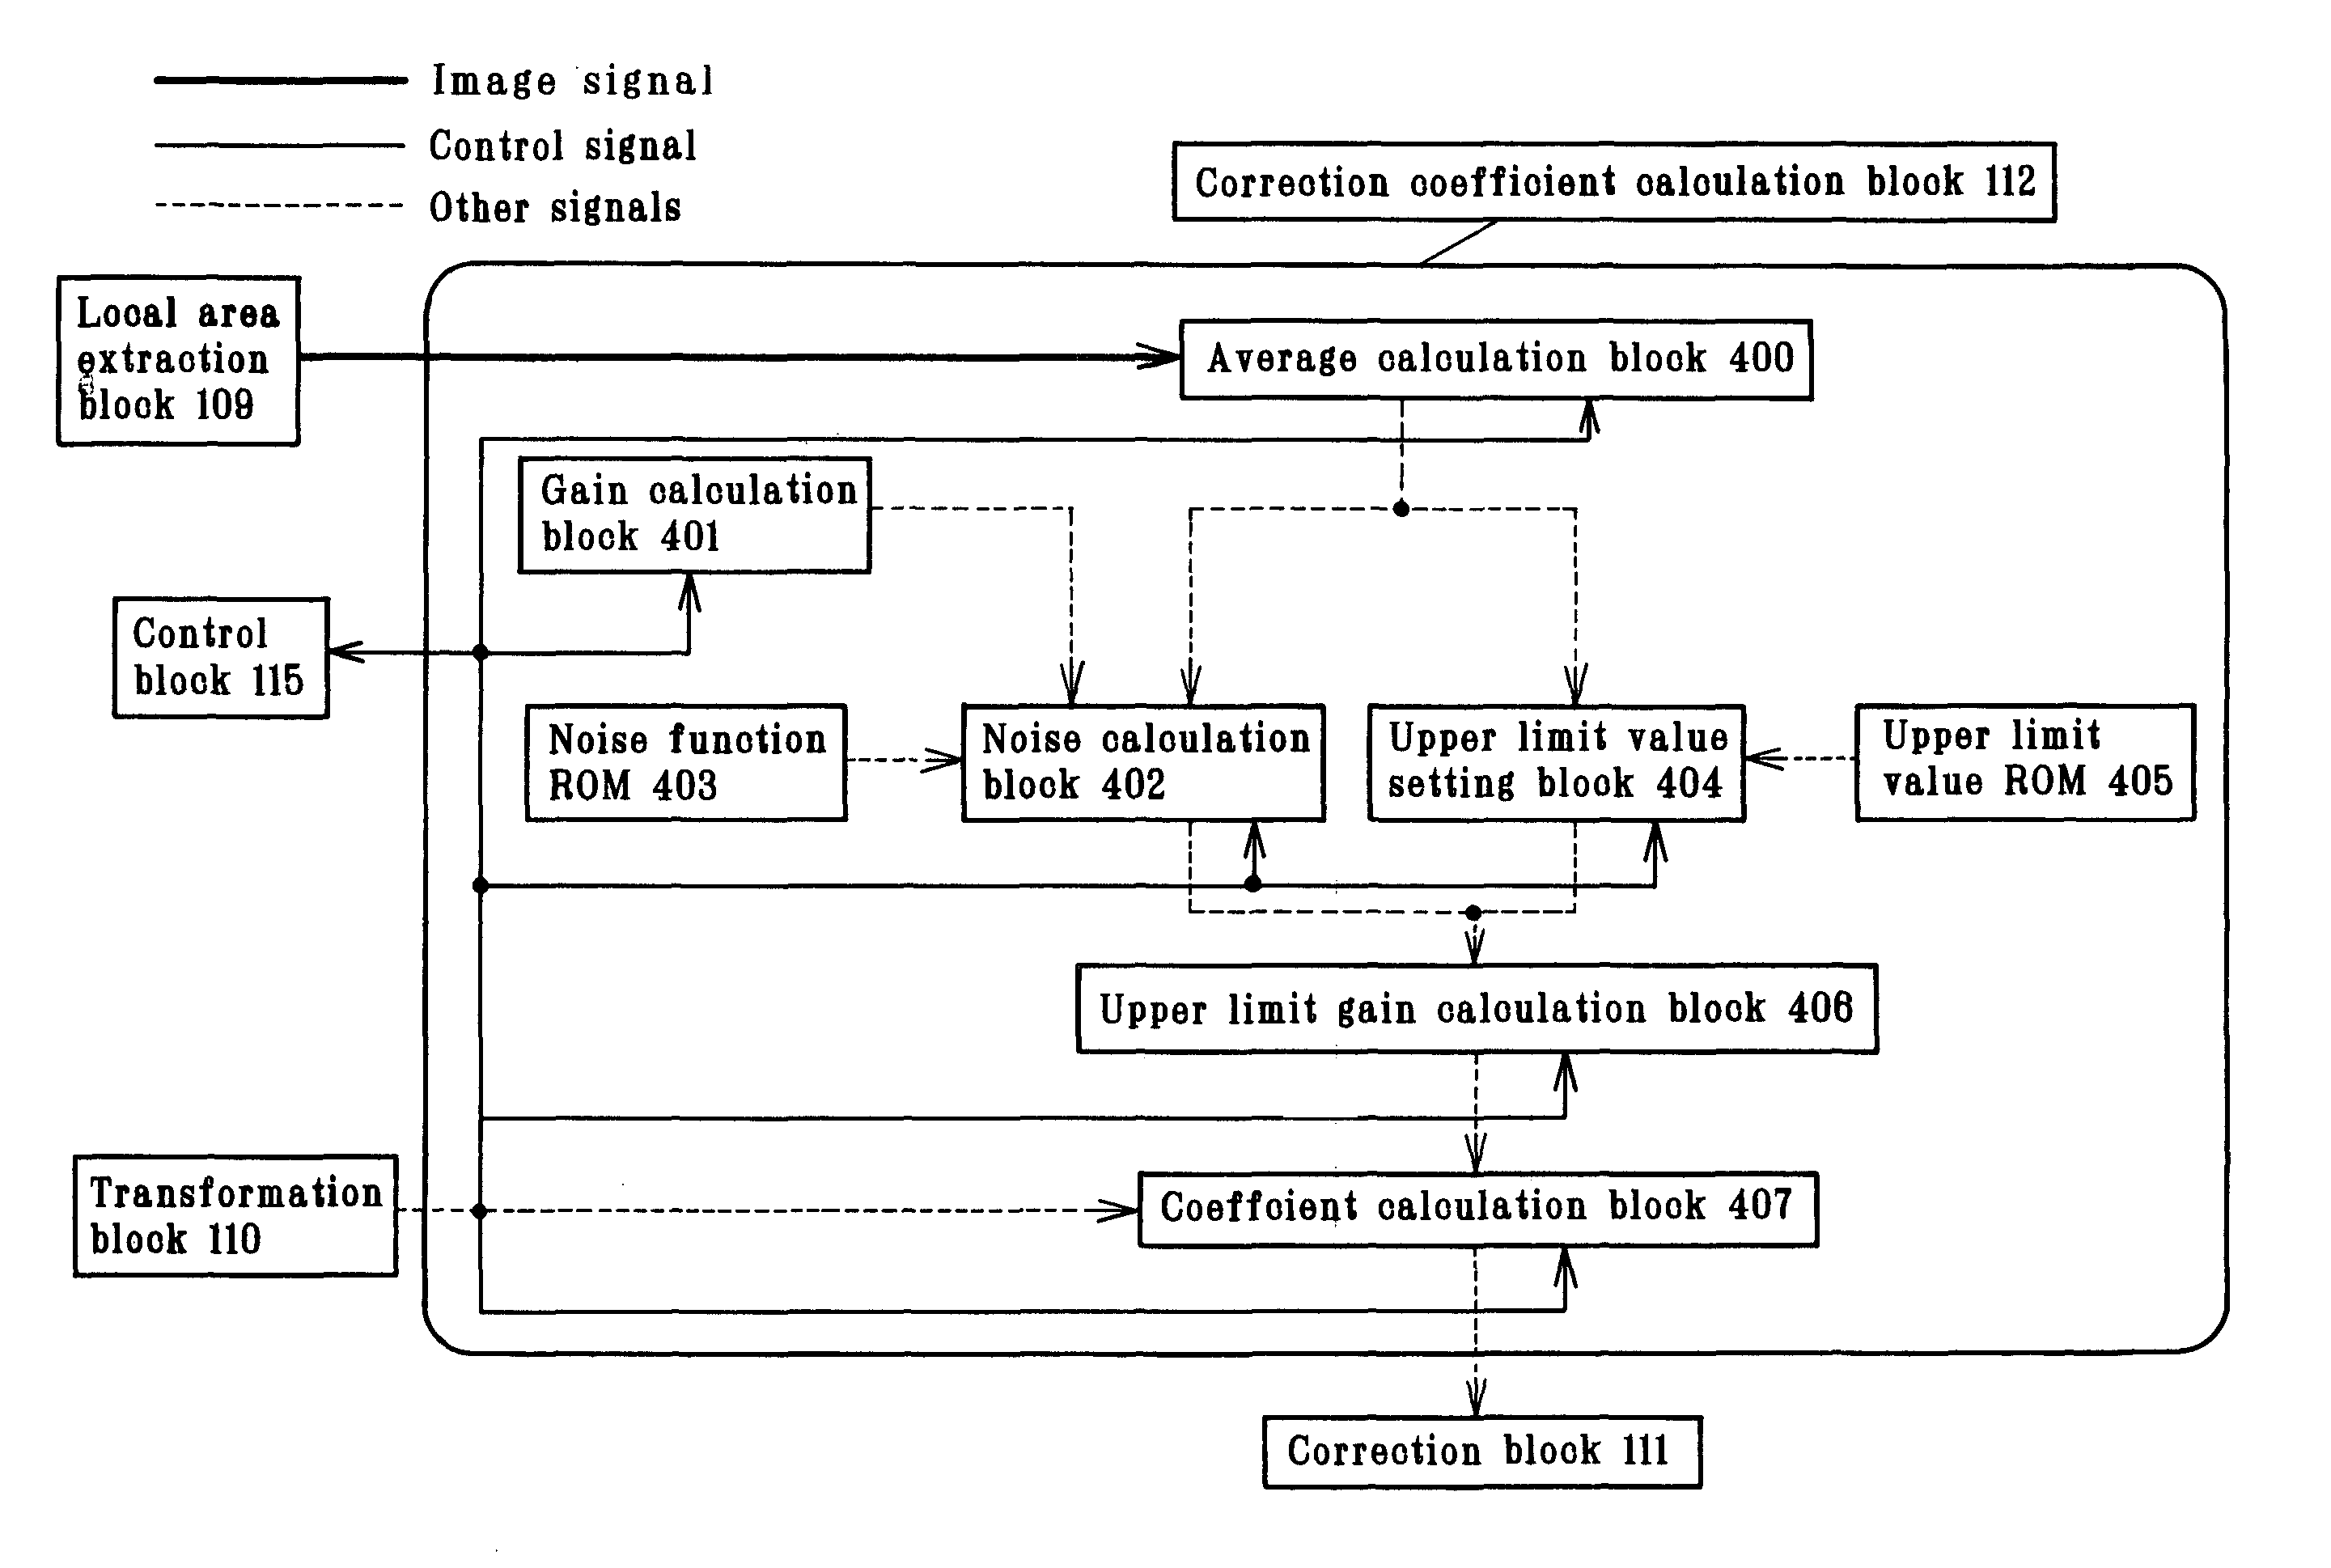 Image processing apparatus which calculates a correction coefficient with respect to a pixel of interest and uses the correction coefficient to apply tone correction to the pixel of interest